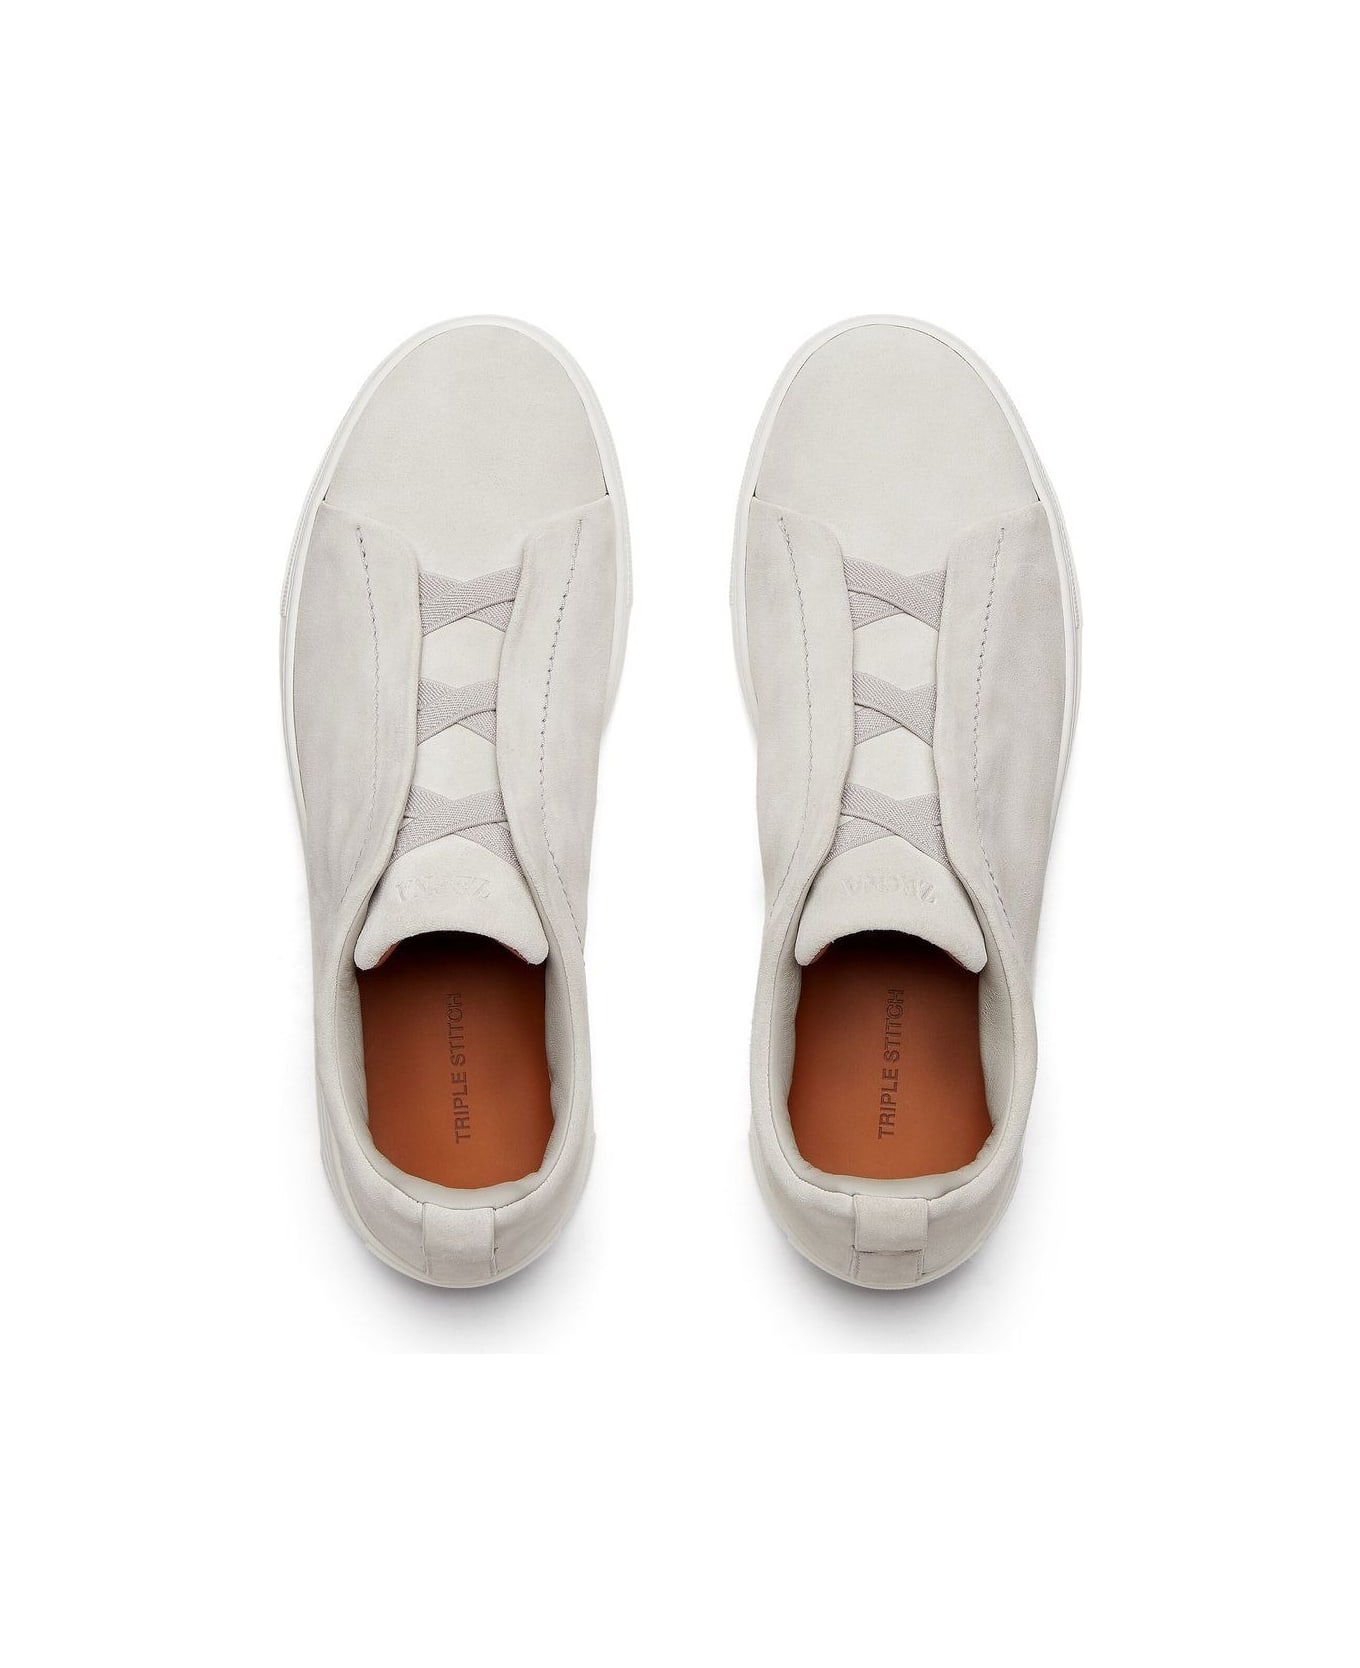 Zegna Triple Stitch Sneakers In White Suede - White スニーカー